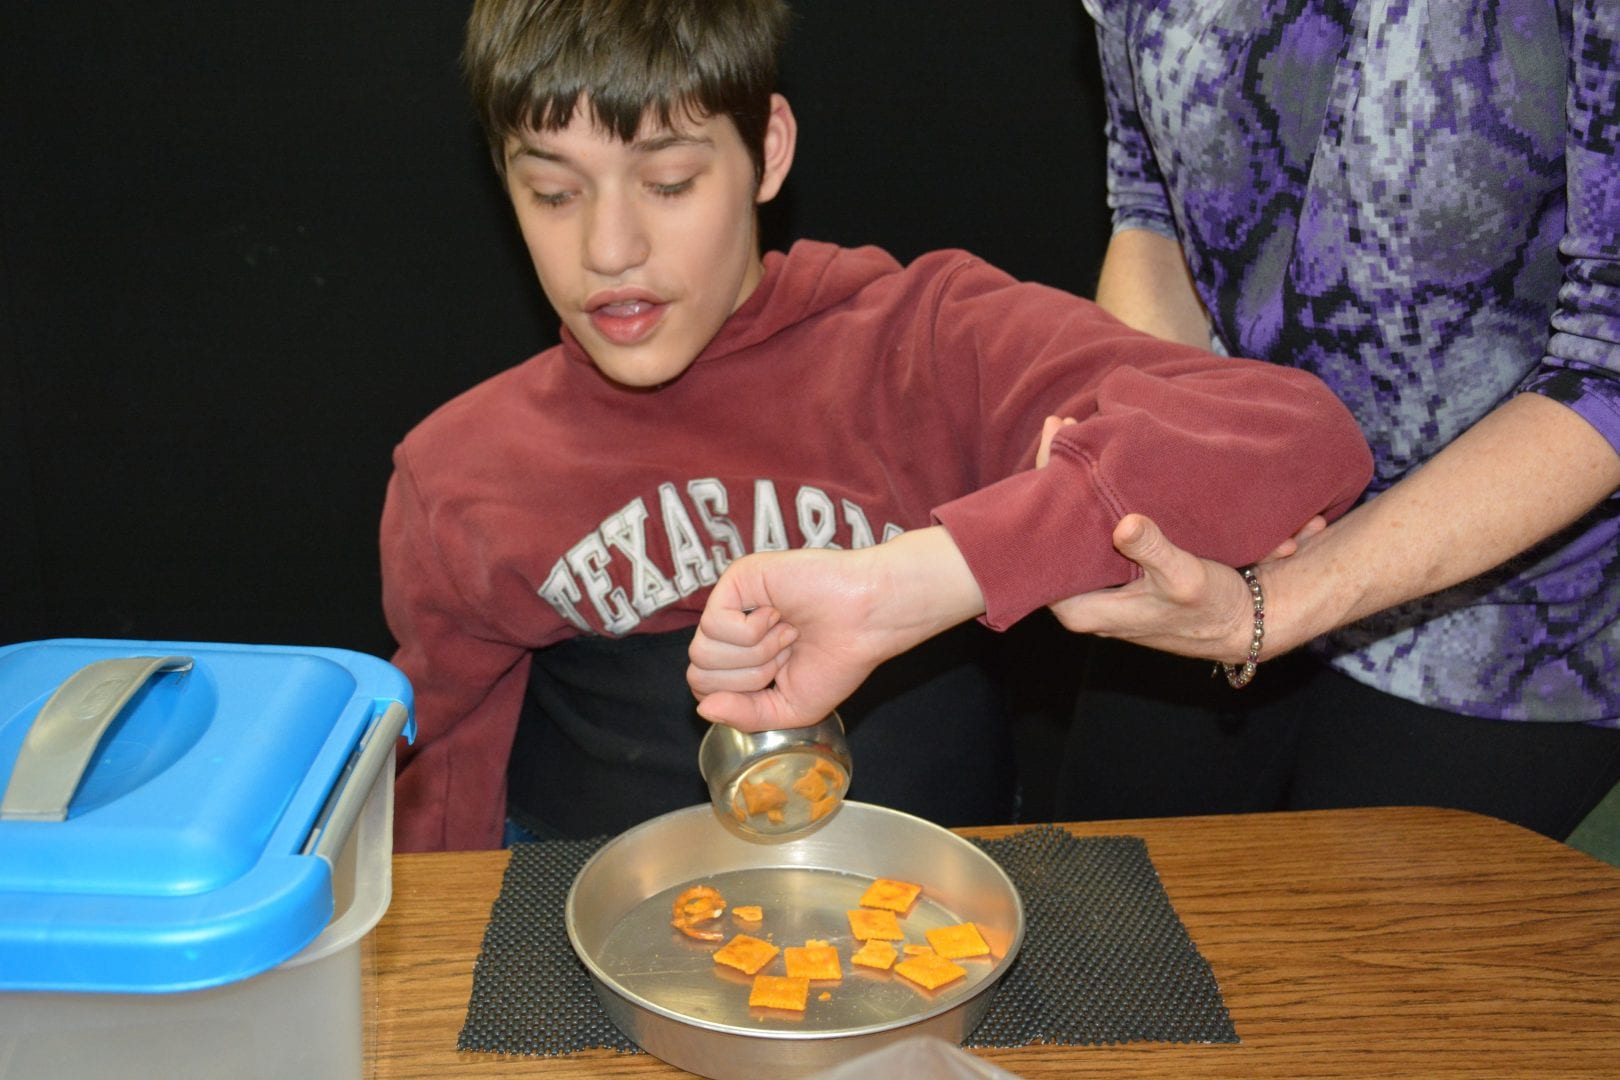 A teacher provides elbow support as a learner uses a measuring cup to pour his snack into a pan